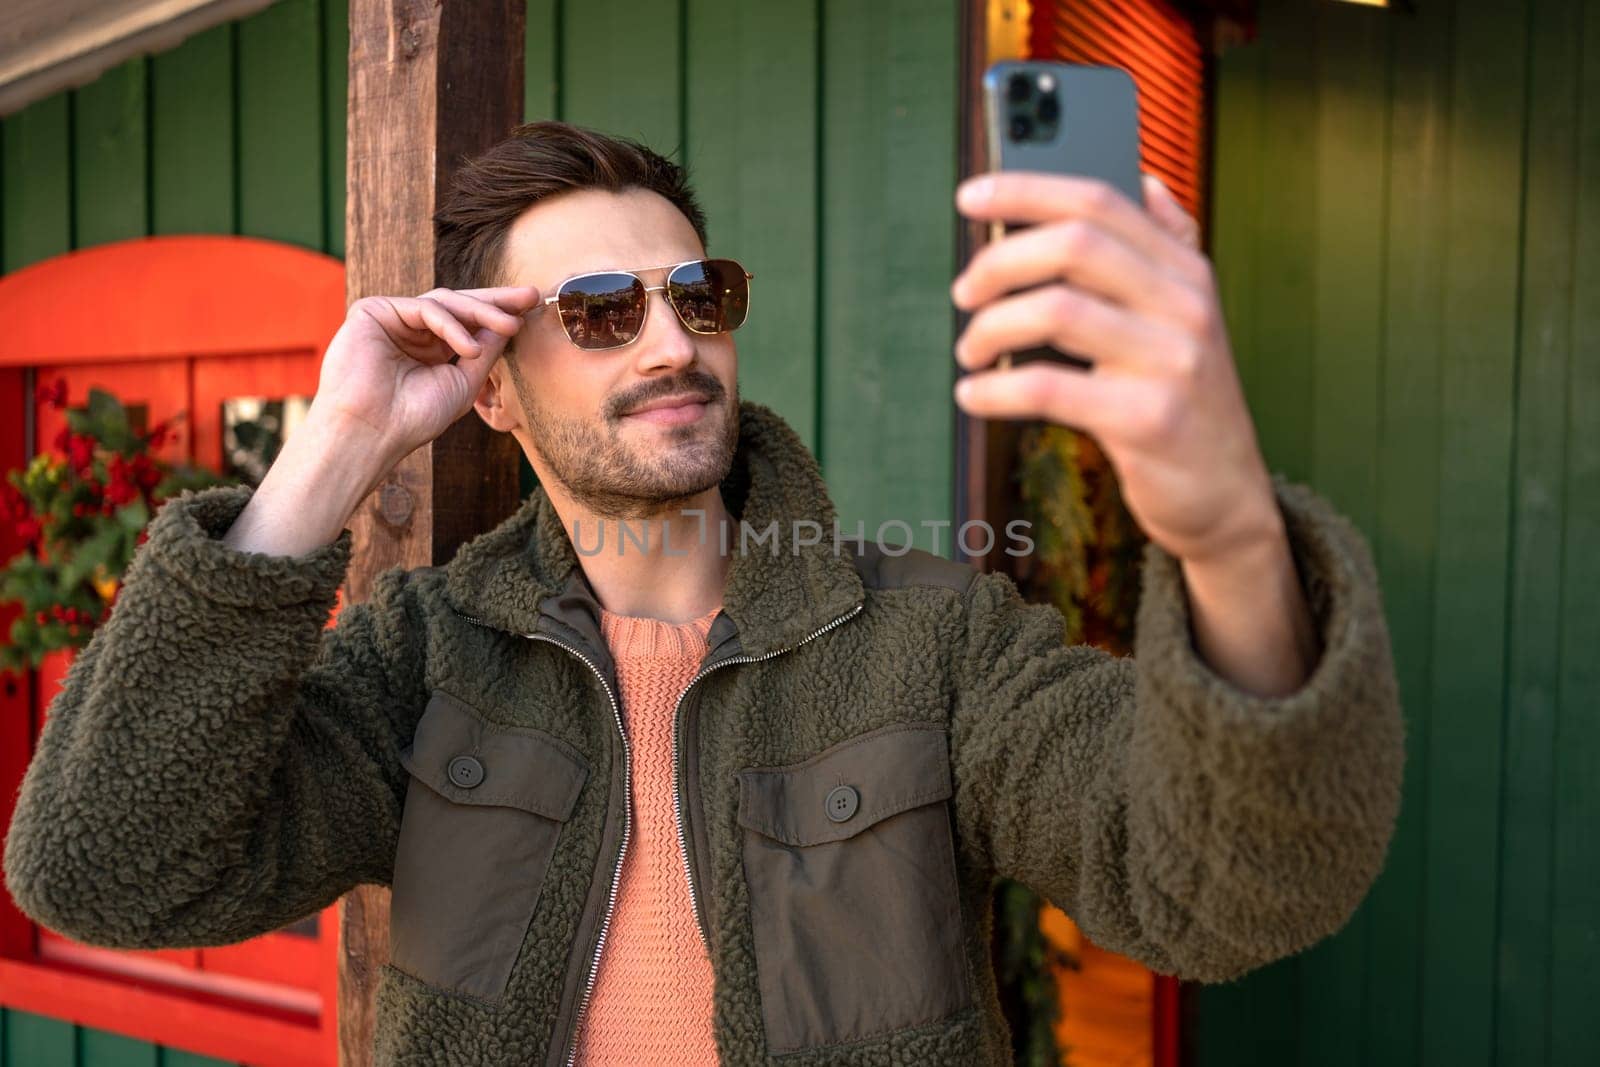 Handsome young man taking self portrait while walking through the city. Urban millenial with beard wearing sunglasses using smartphone and smiling carefree outdoors. Lifestyle concept.